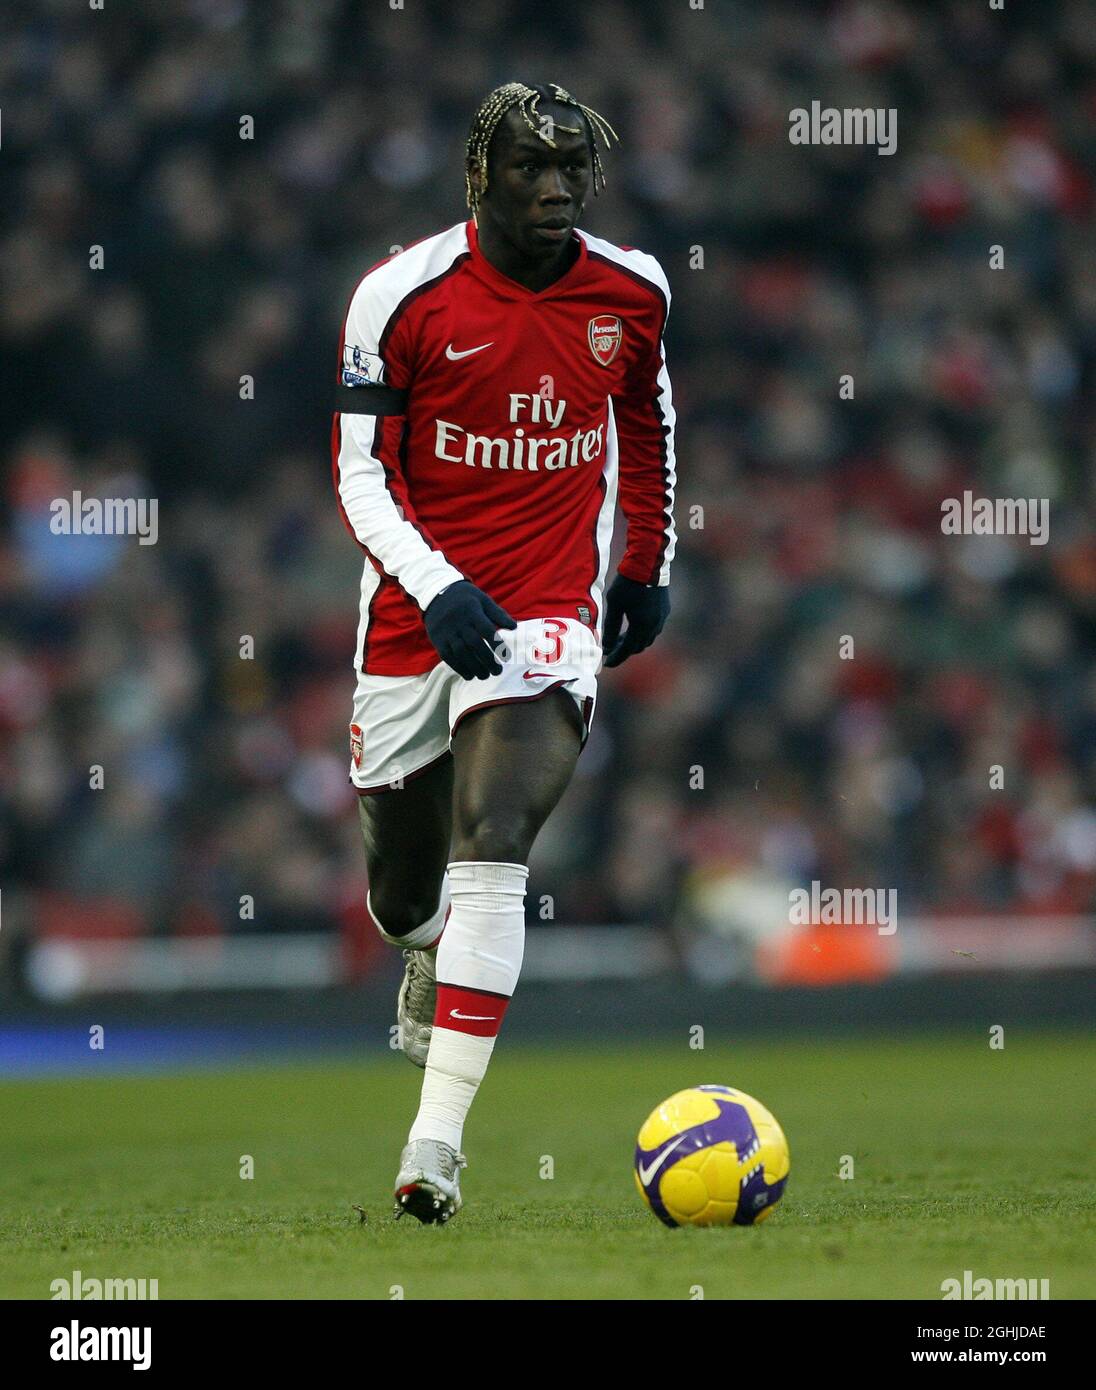 Arsenal's Bacary Sagna during Barclays Premier League match, Arsenal vs. West Ham United. Stock Photo